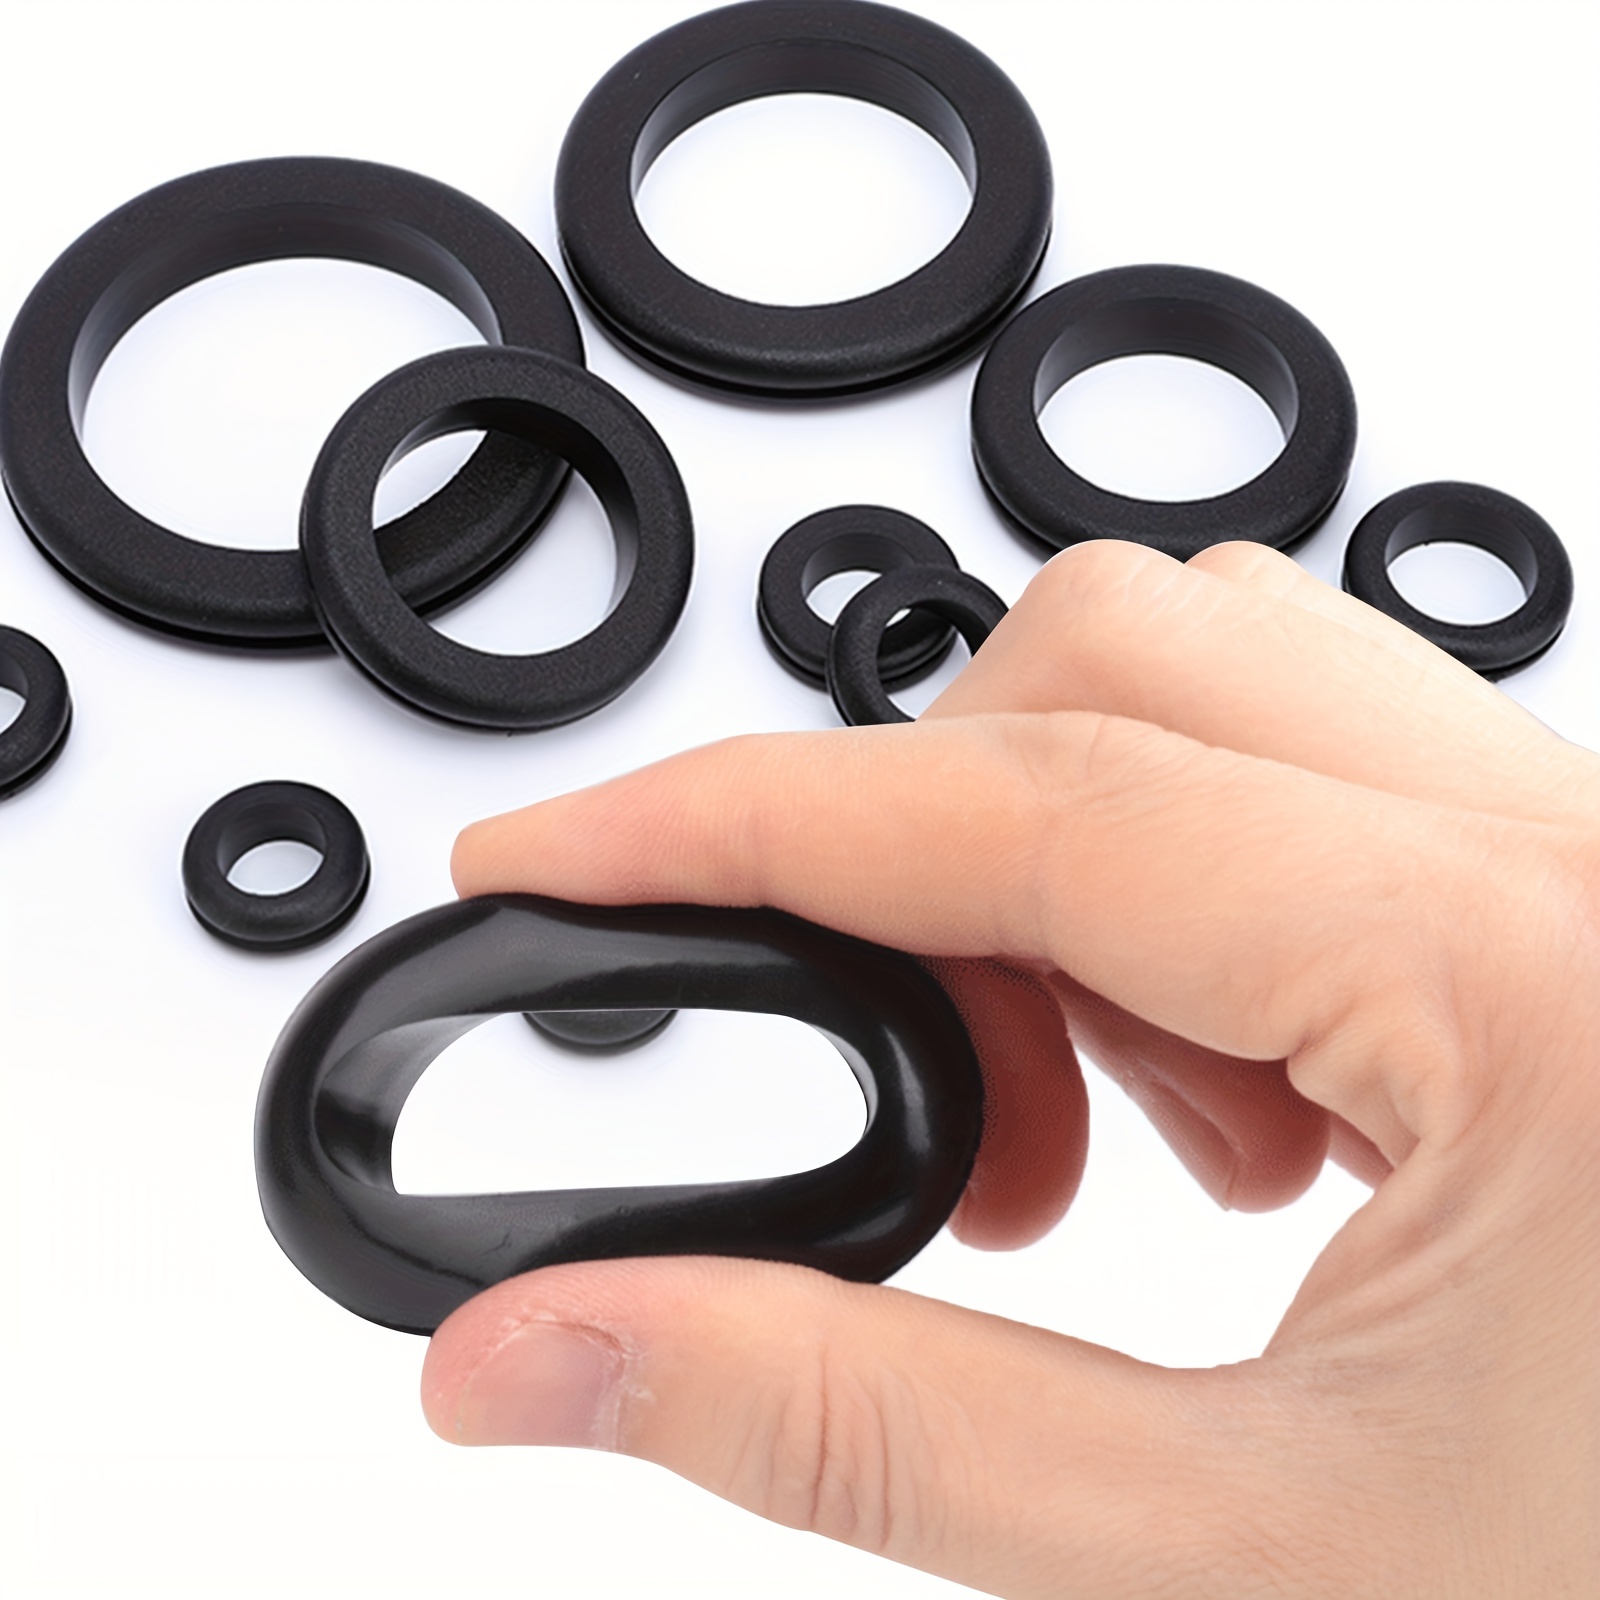 260pcs Rubber Grommet Kit Set Of 7 Sizes, Firewall Hole Plug Ring Rubber  Gasket For Plumbing, Hardware Repair, Automotive, Wiring, Plug And Cable